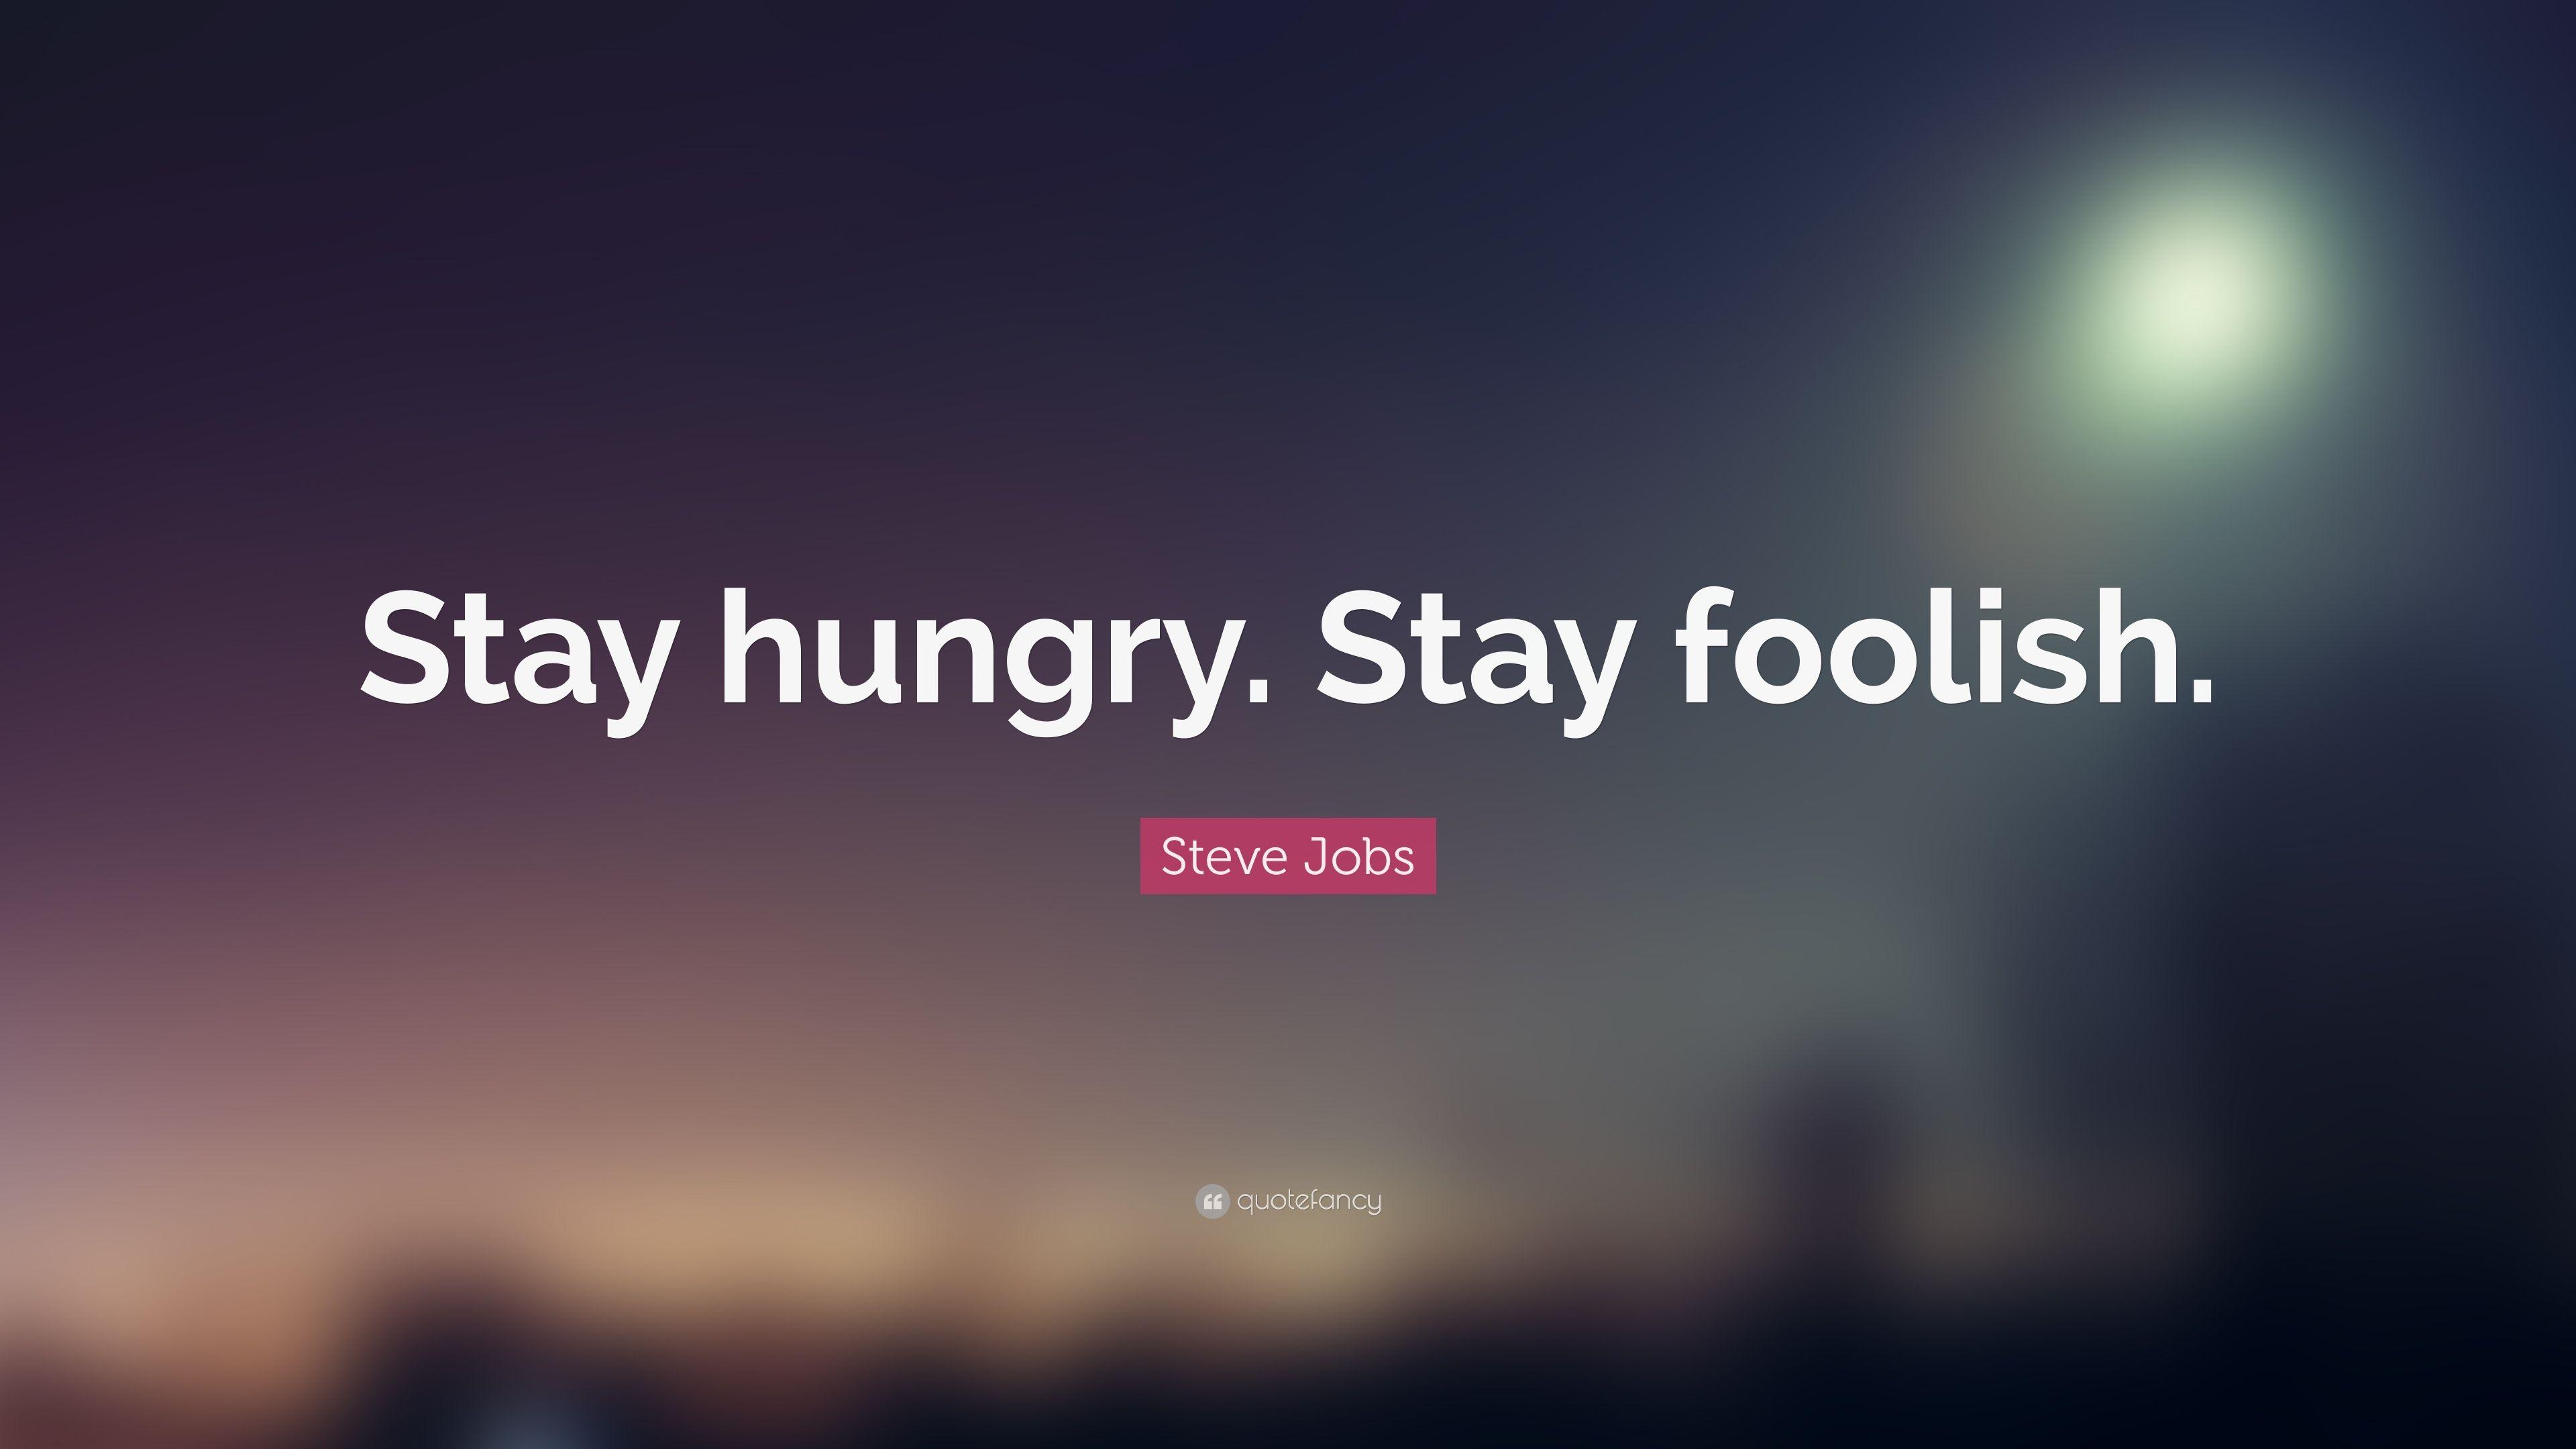 Steve Jobs Quote: “Stay hungry. Stay foolish.” 41 wallpaper